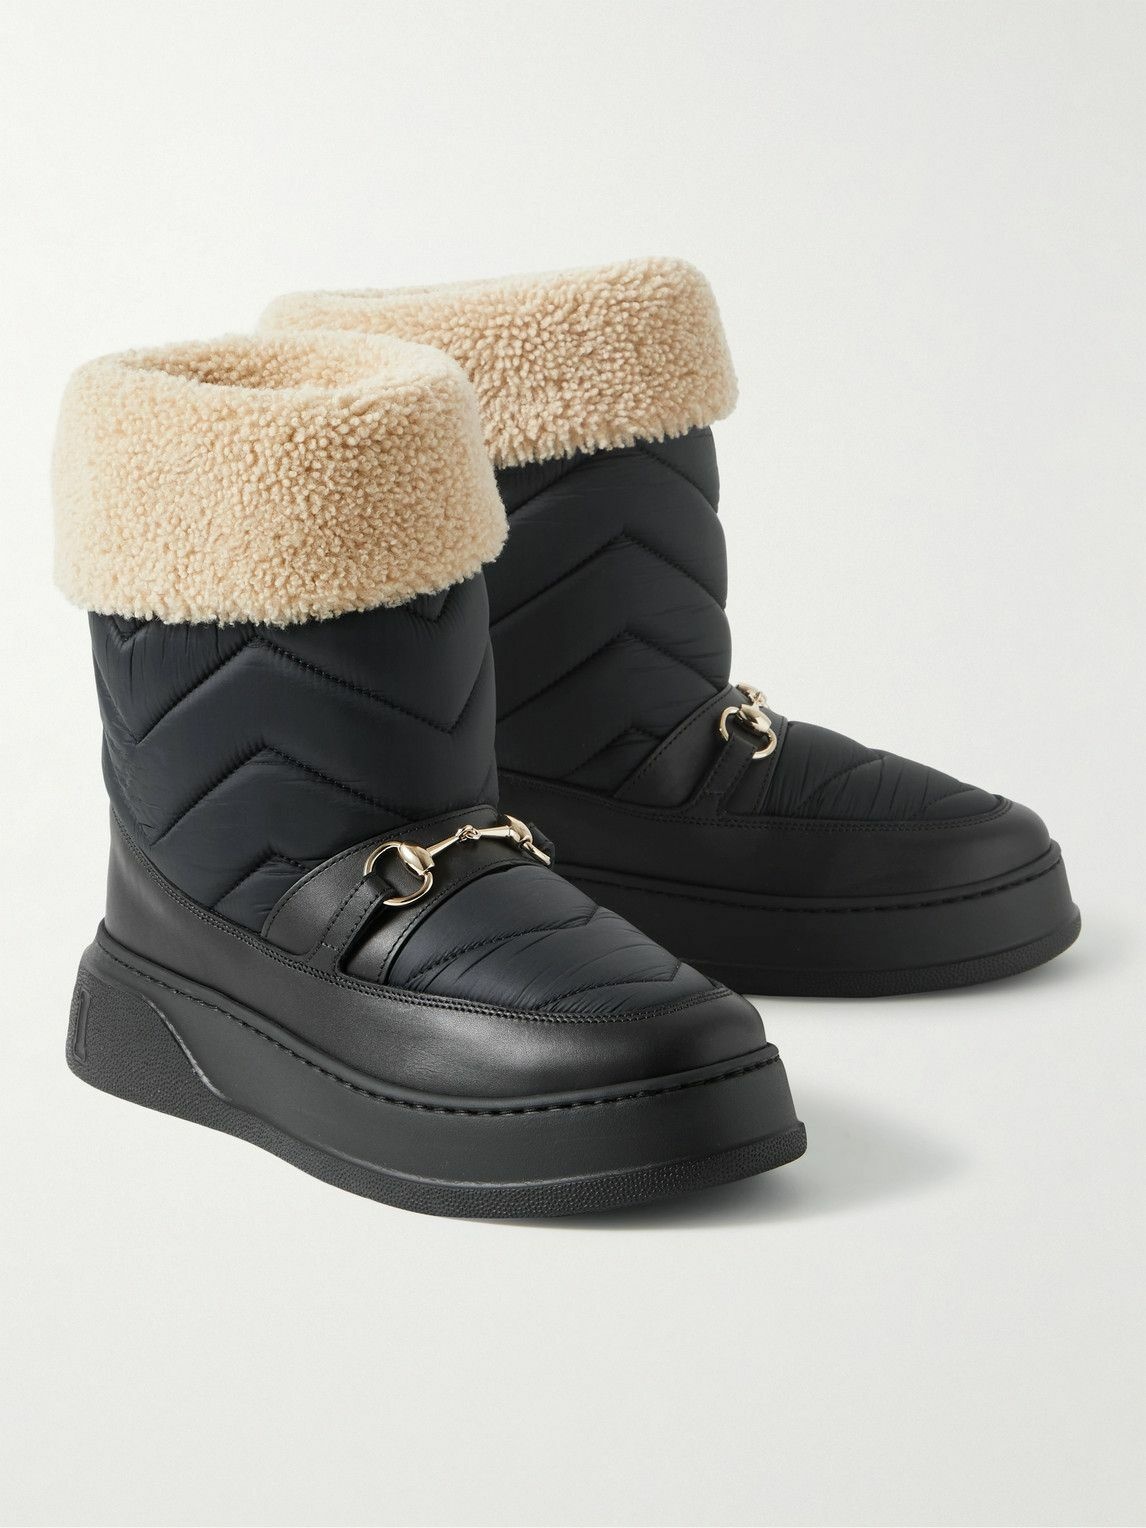 GUCCI - Horsebit Shearling-Trimmed Quilted Nylon and Leather Boots ...